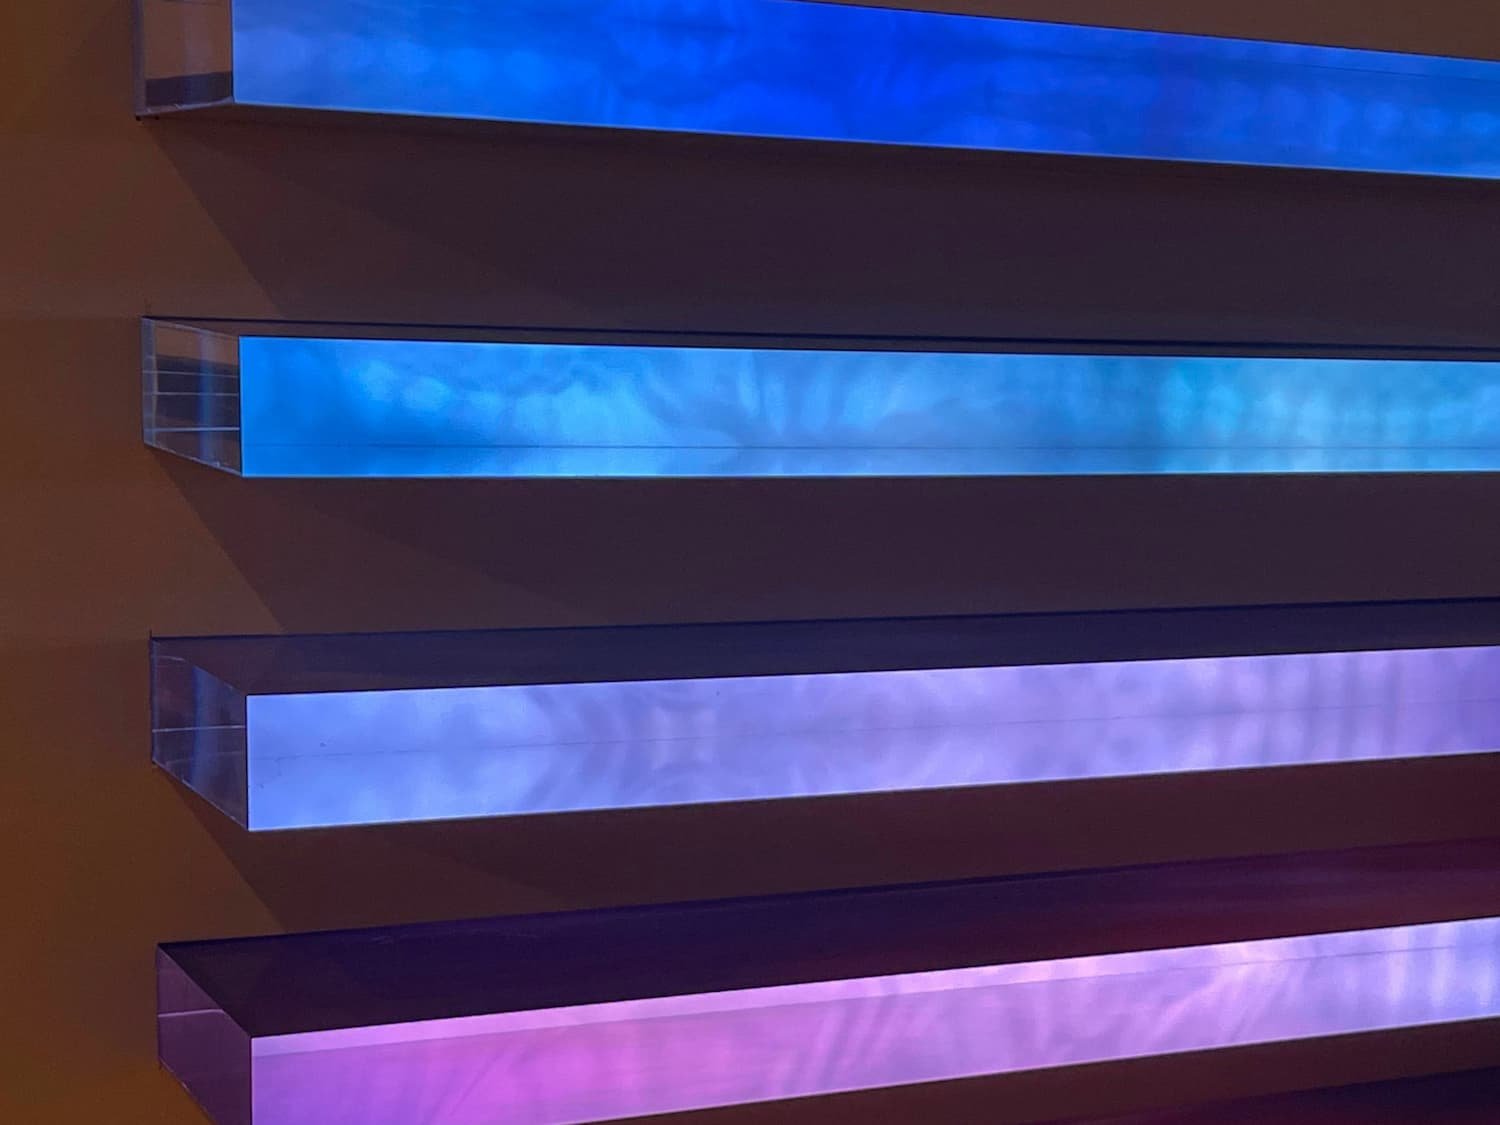 A close-up of the details of the optical filters in the dynamic light sculpture.